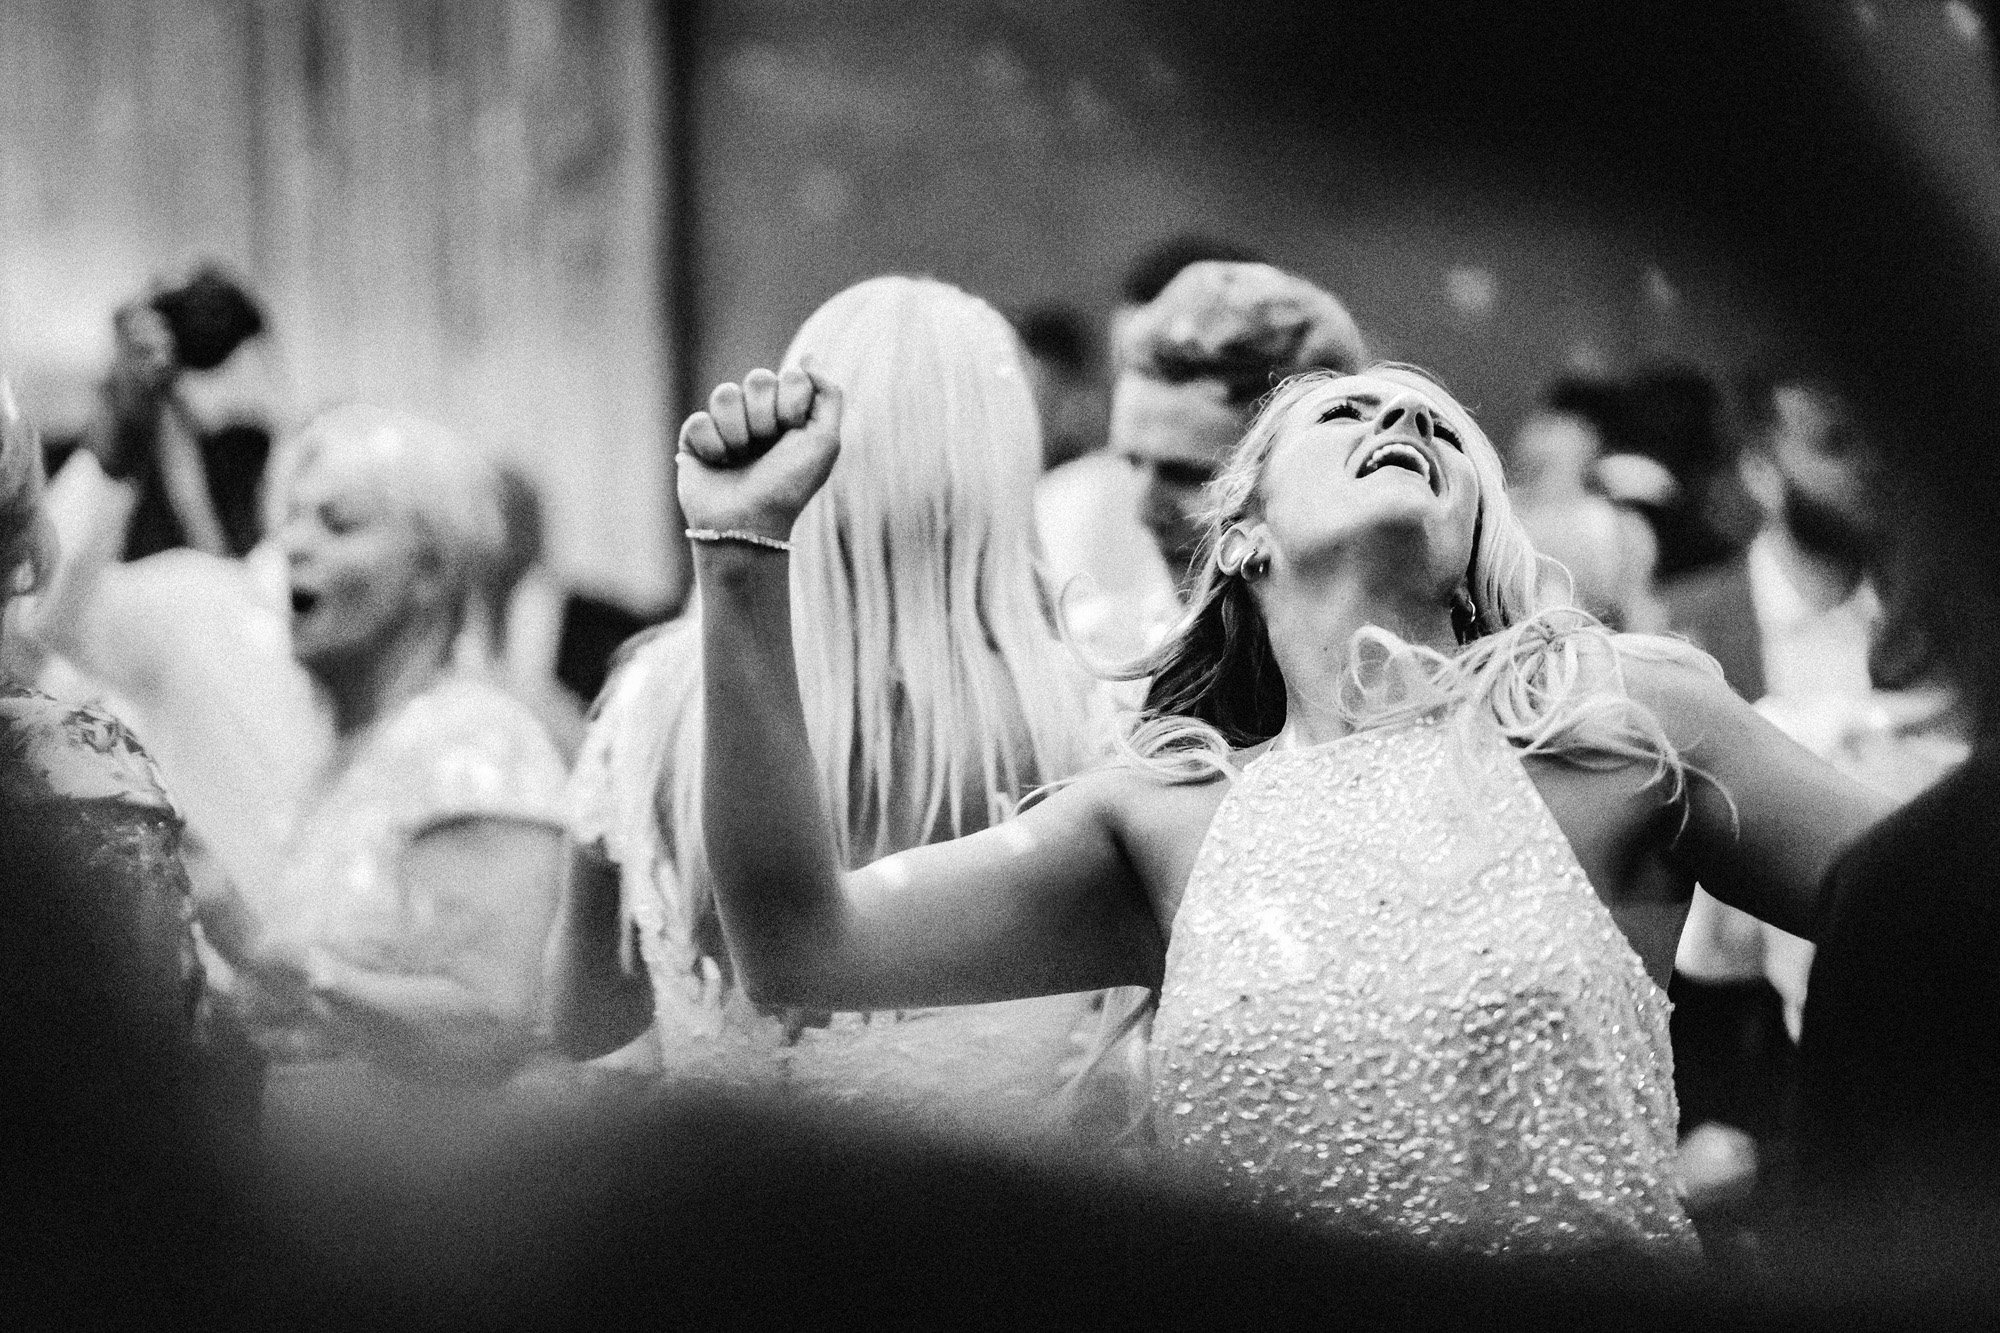 Bride dances with passion, throwing her head back with arms in the air in a candid black and white photo